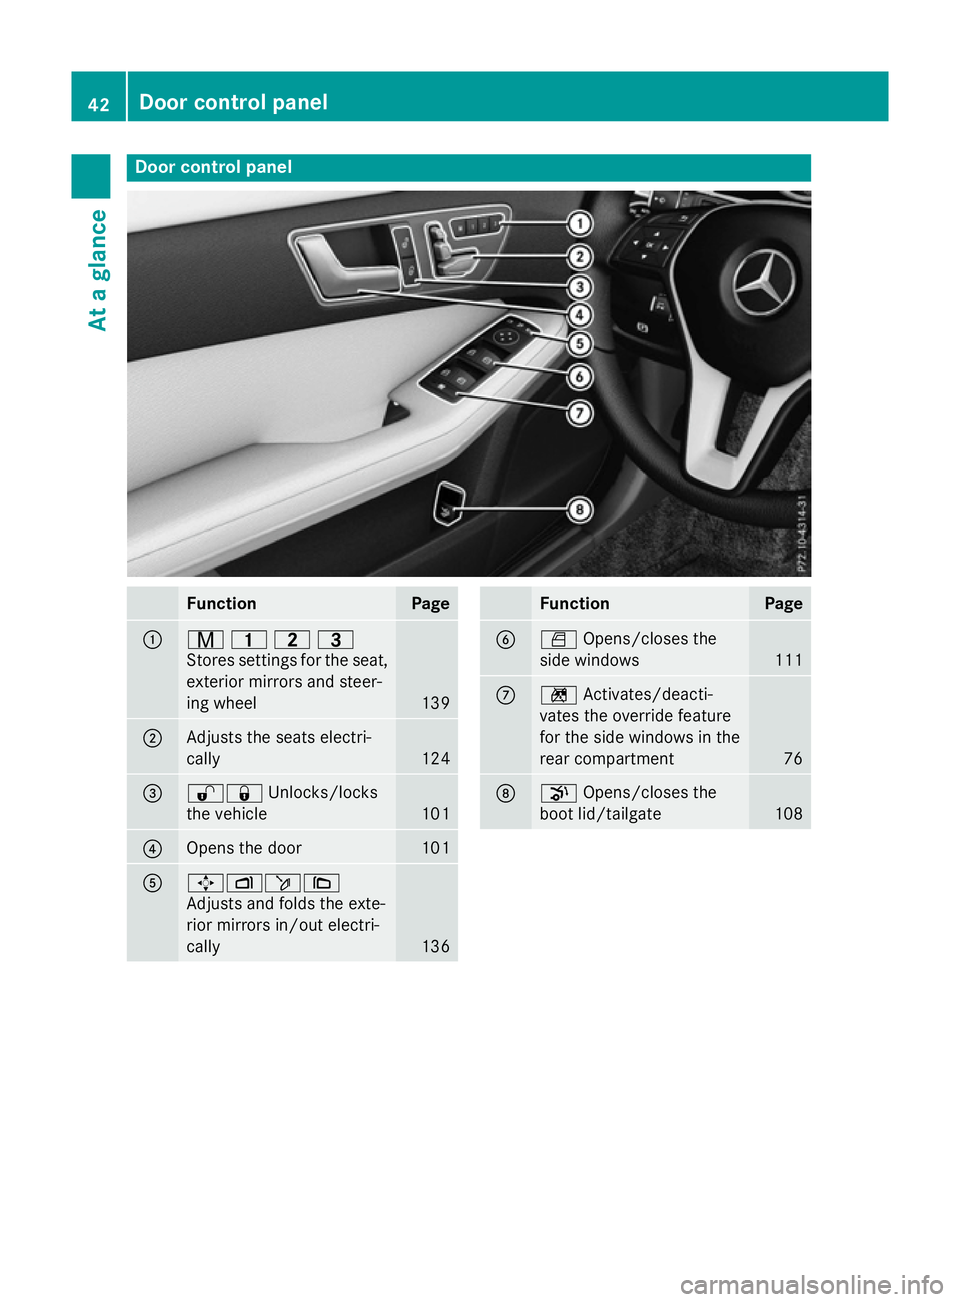 MERCEDES-BENZ E-CLASS SALOON 2015  Owners Manual Door contro
lpanel Function Page
:
r
45=
Store ssettings for the seat,
exterio rmirrors and steer-
ing wheel 139
;
Adjusts the seats electri-
cally
124
=
%&
Unlocks/locks
the vehicle 101
?
Opens the d